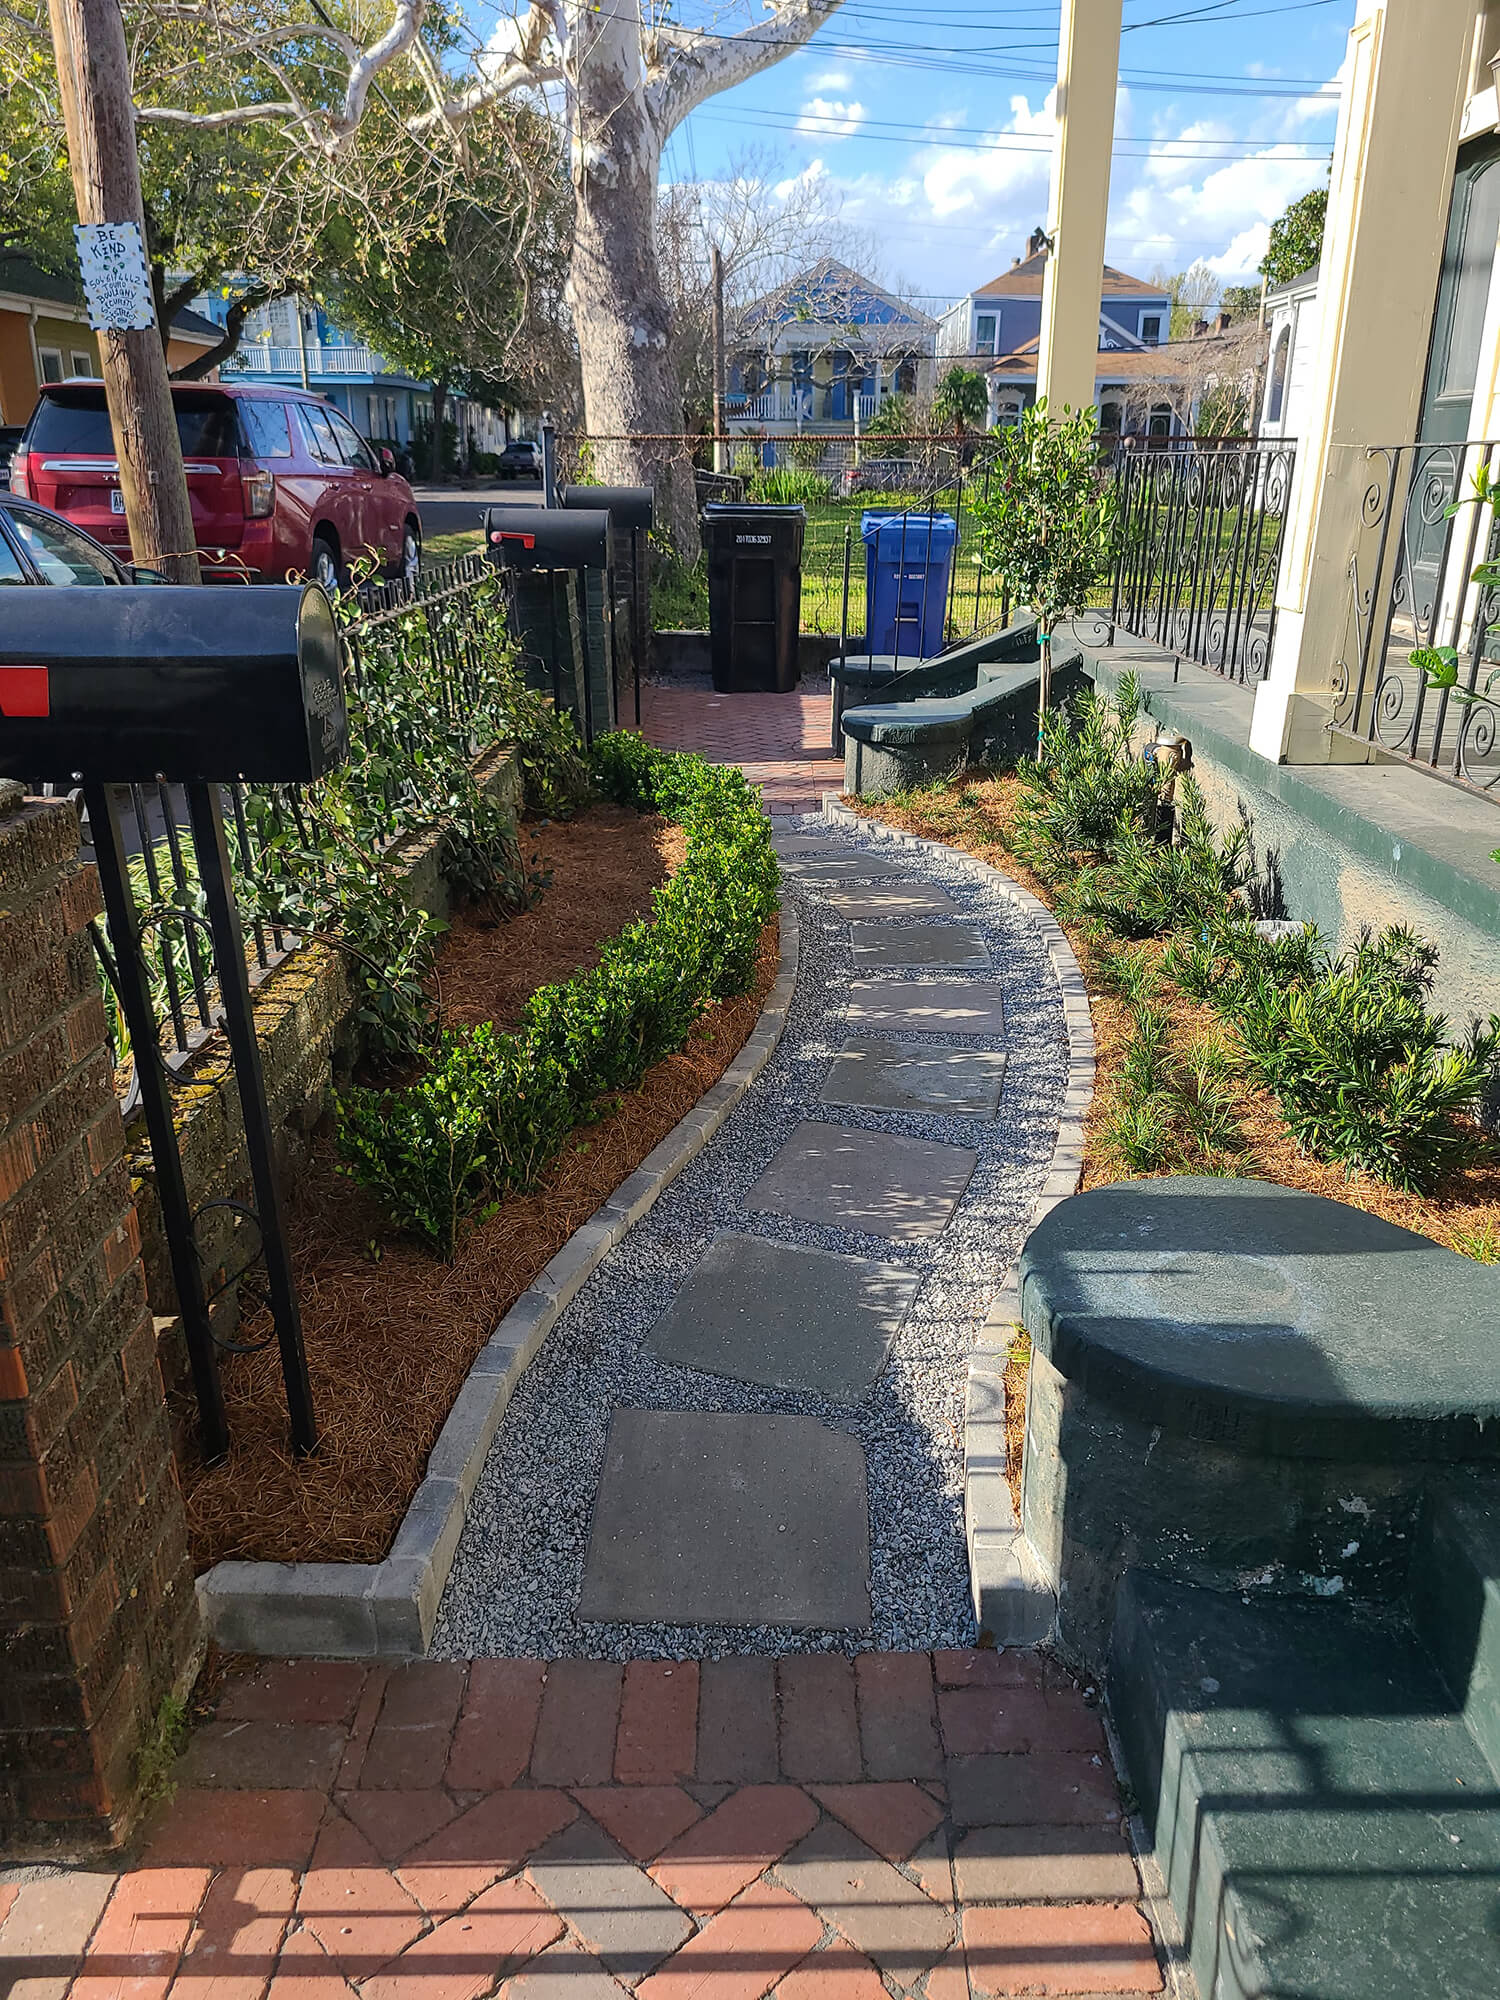 An exterior view of the Duxstand residence pathway, an outdoor landscape design in New Orleans.